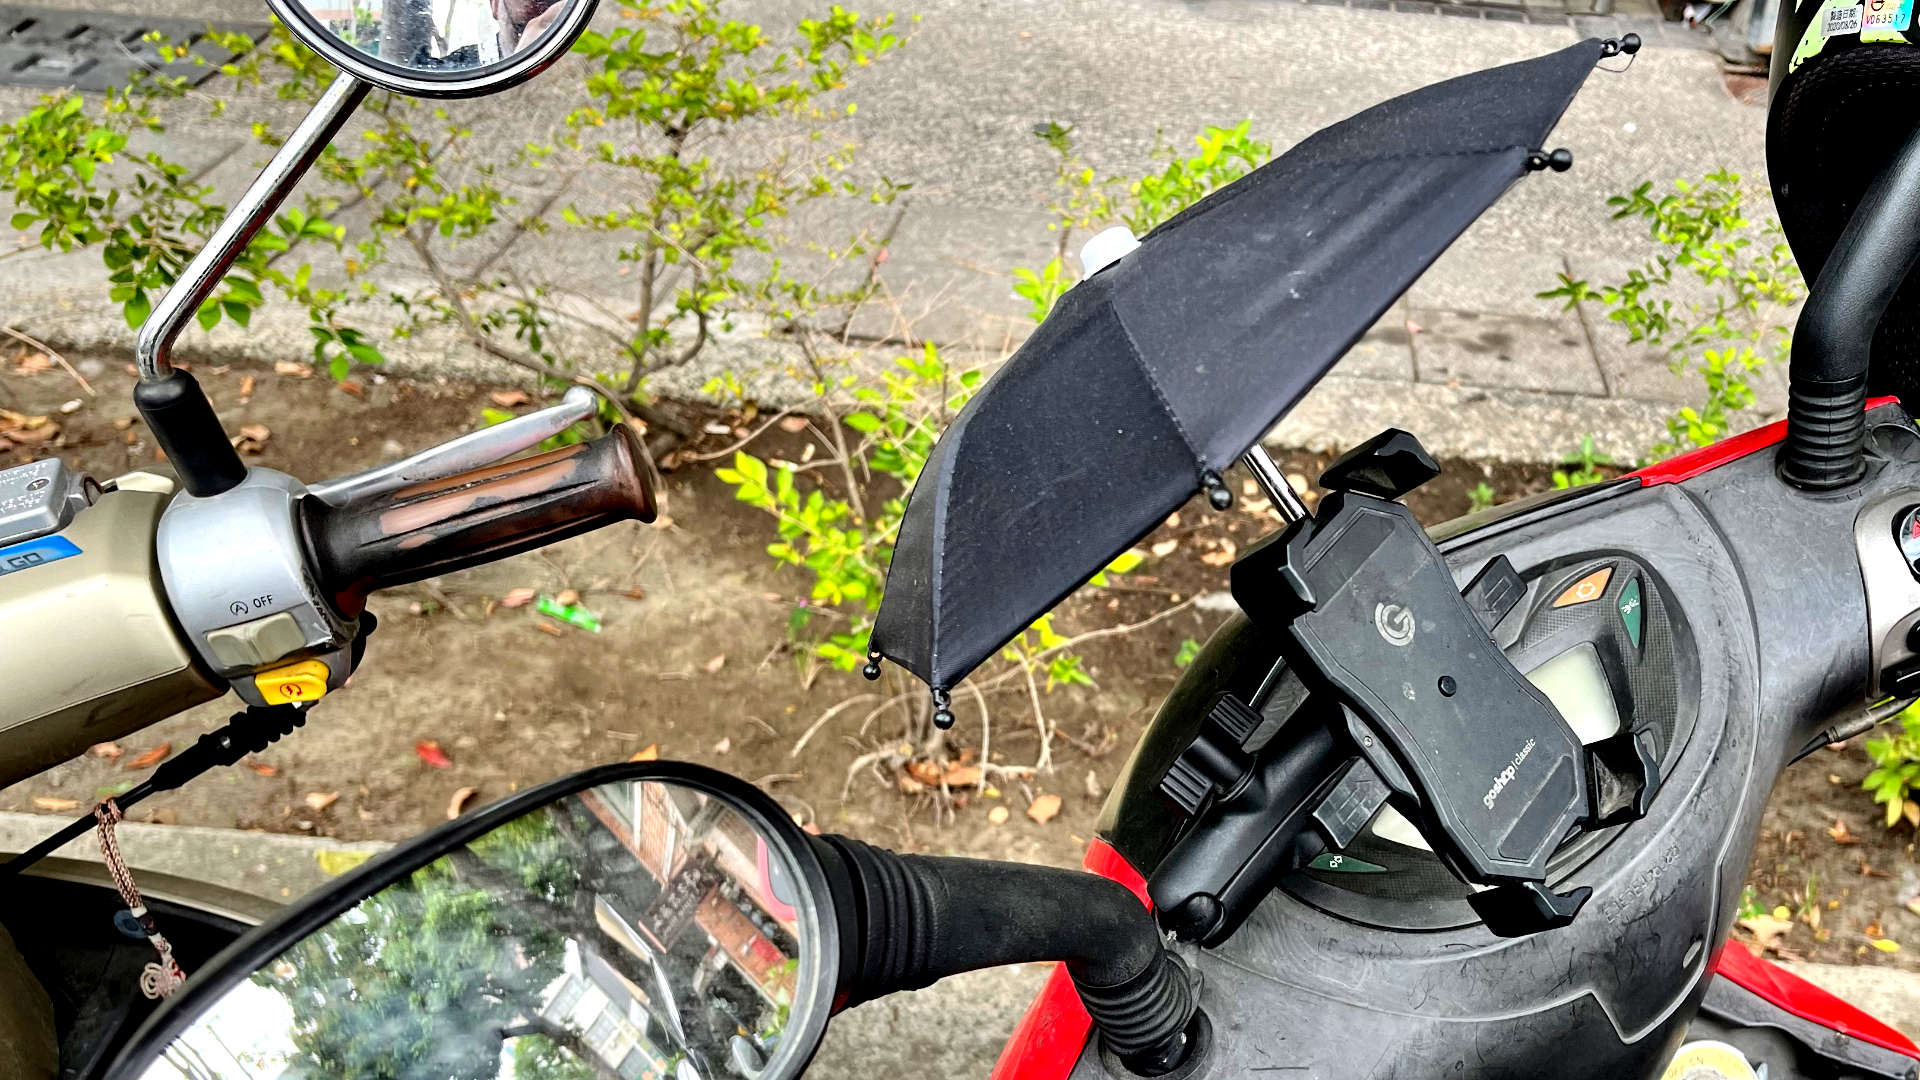 Mobile phone umbrella affixed to a scooter.